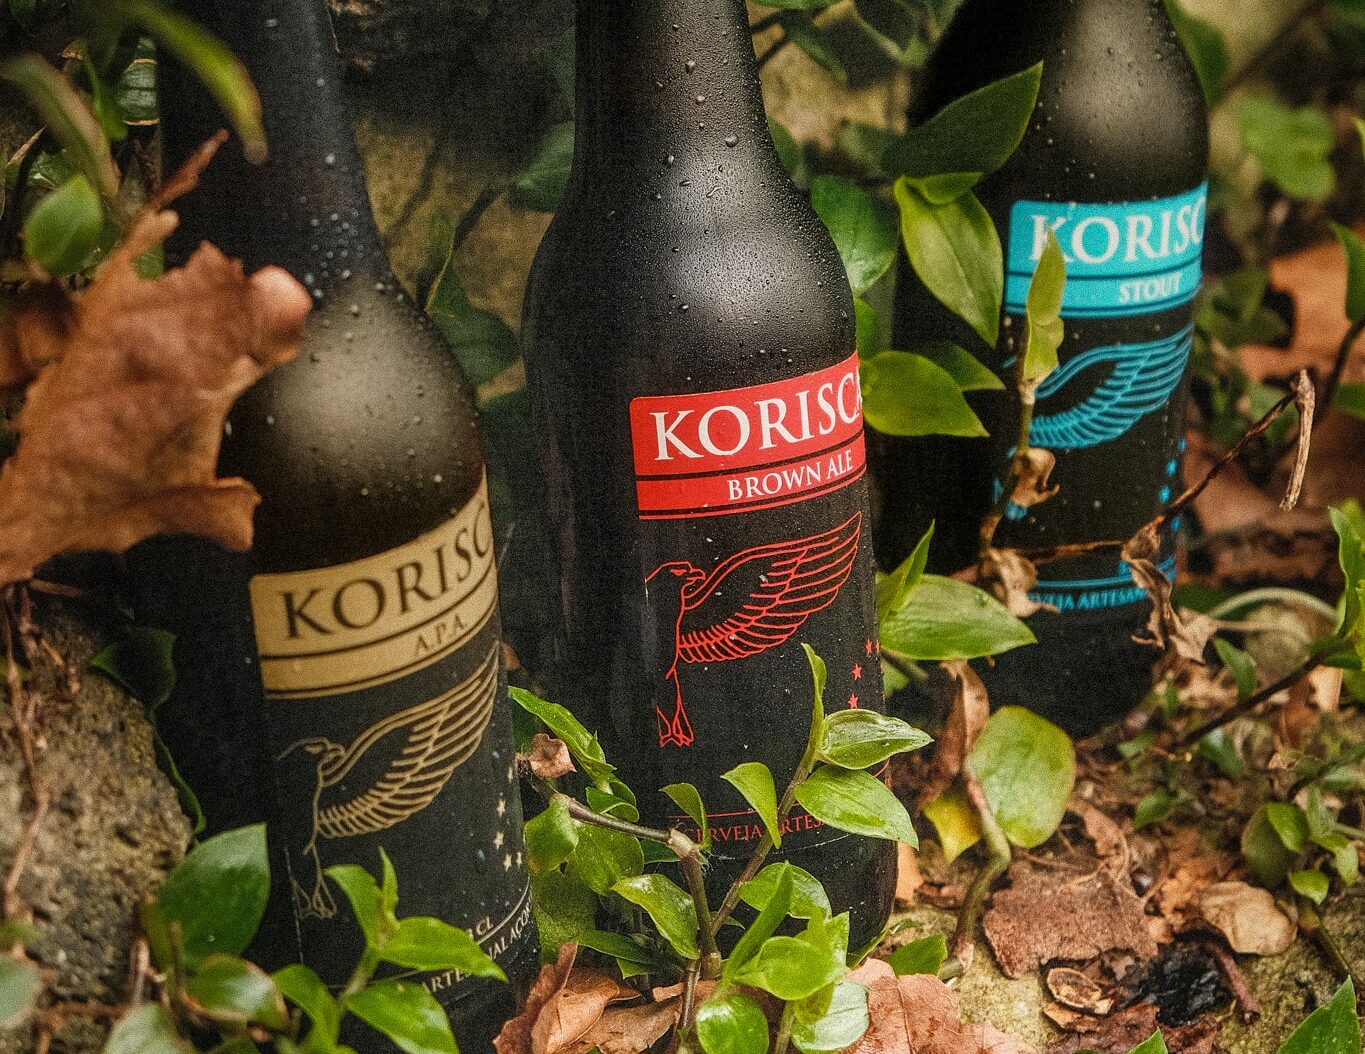 Azorean craft beer Korisca Clássica II (APA), Korisca Clássica I (Brown Ale) and Korisca Clássica III (Stout) on the brown floor with green plants and dark stone, São Miguel, Azores.